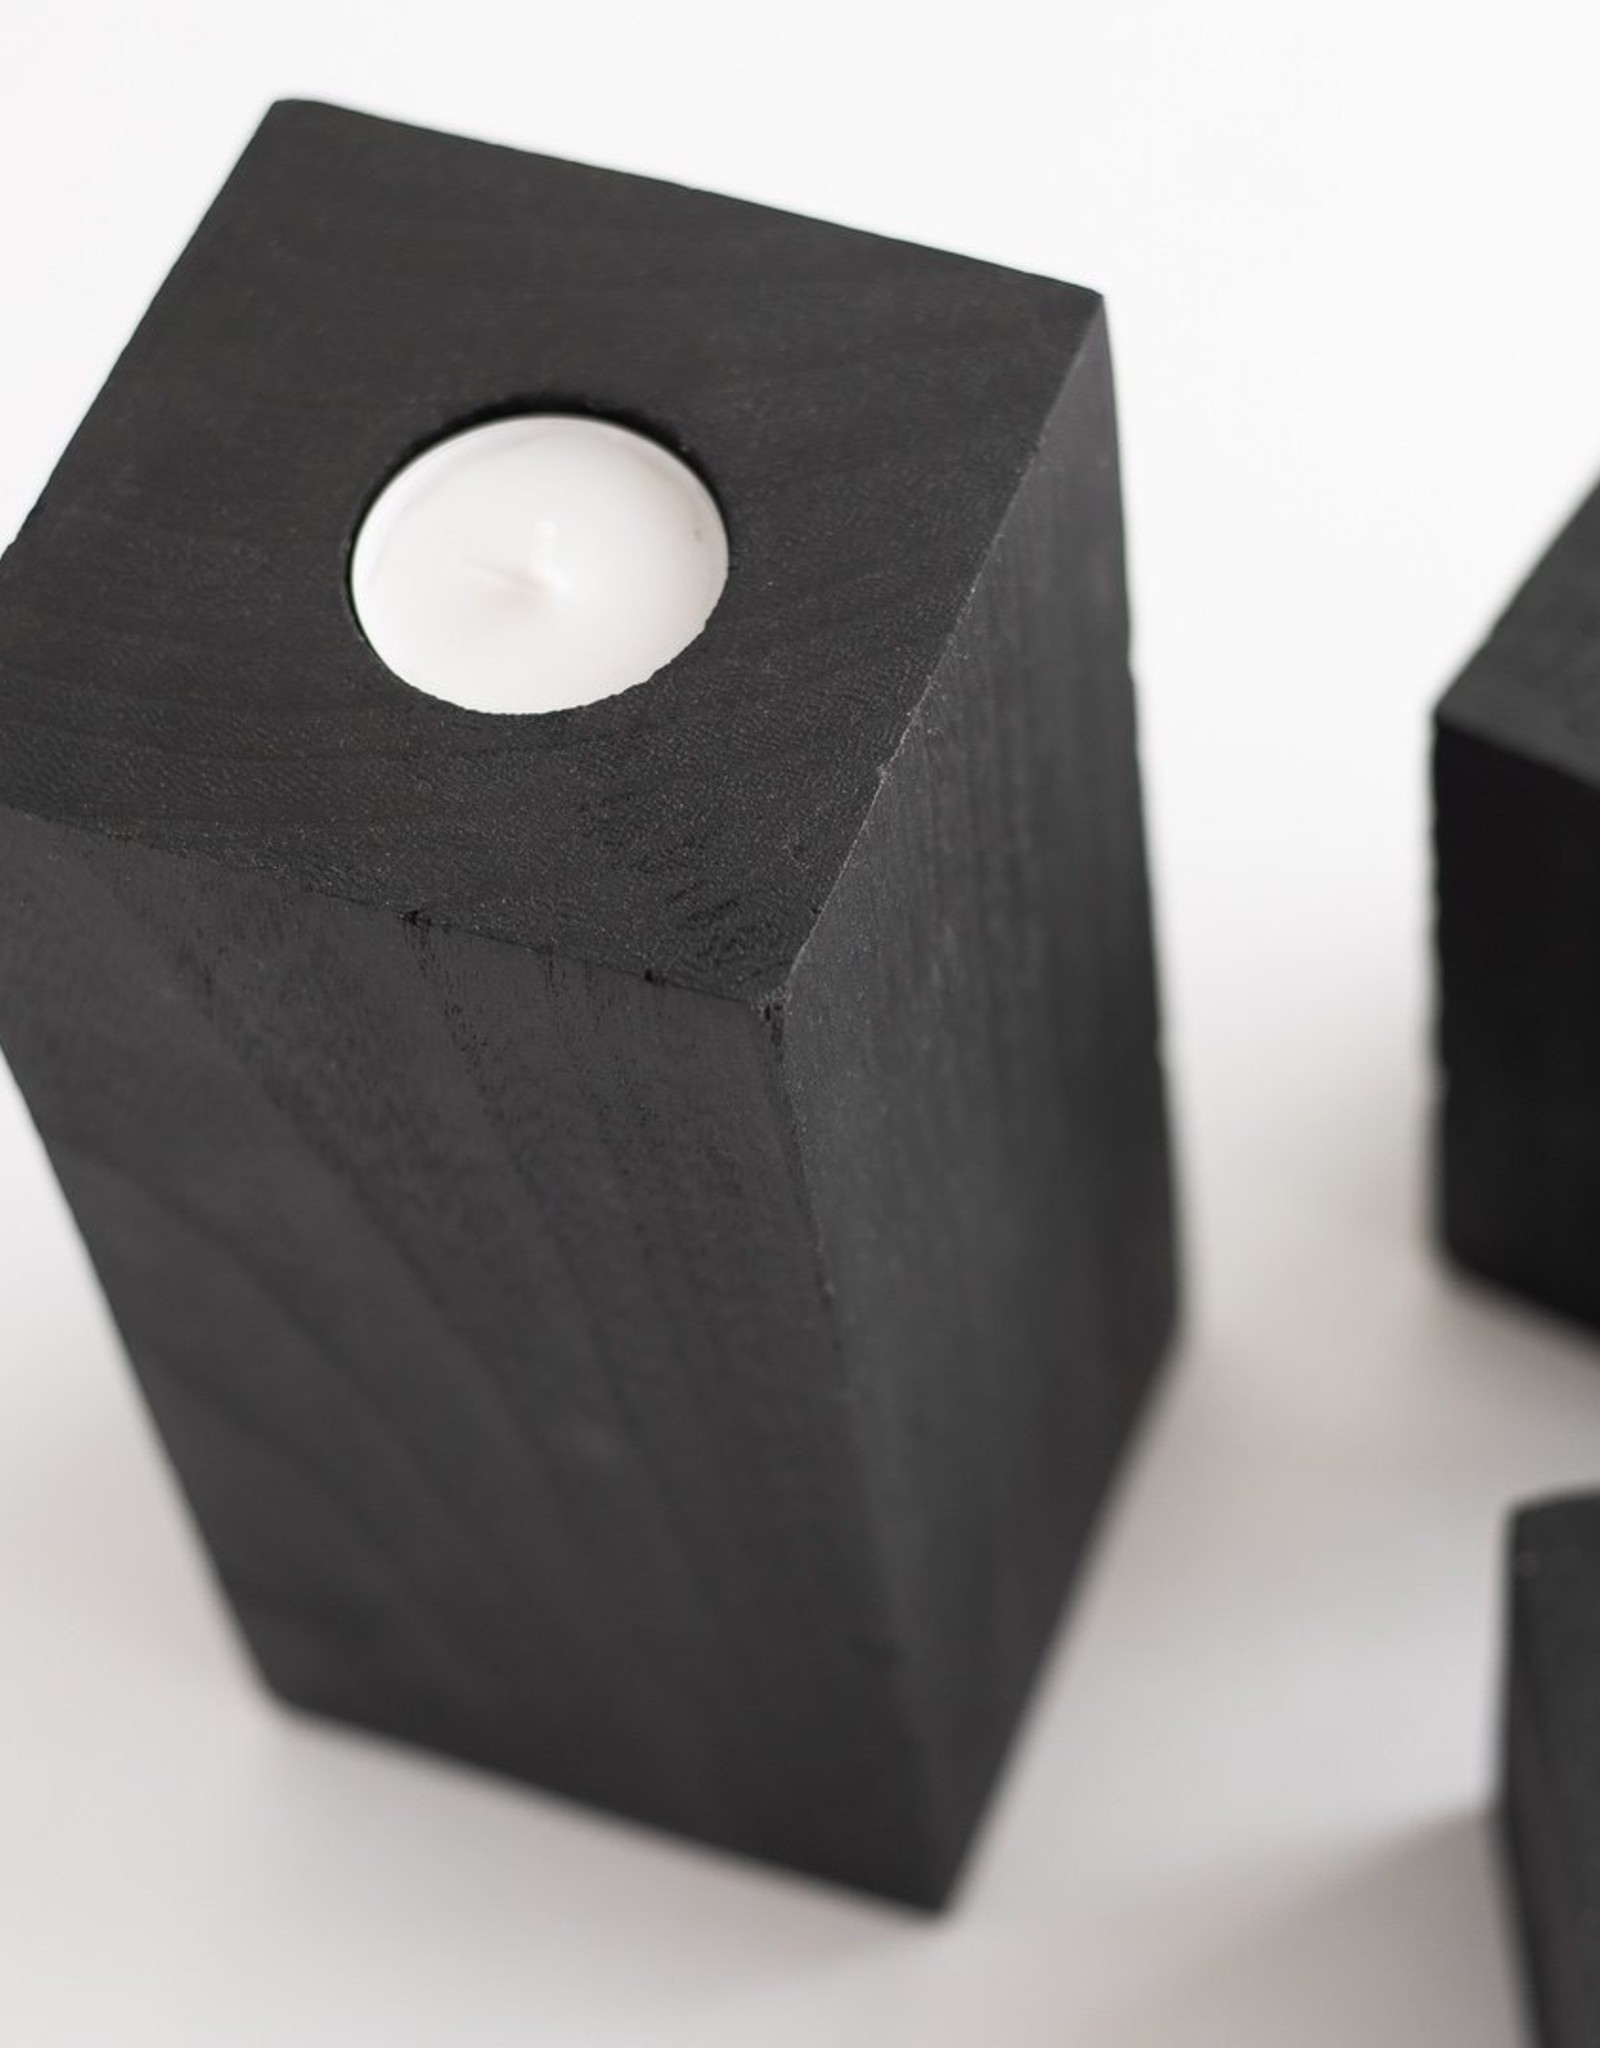 Style In Form Candle Holder SIF Nova Tealights Black Square LG